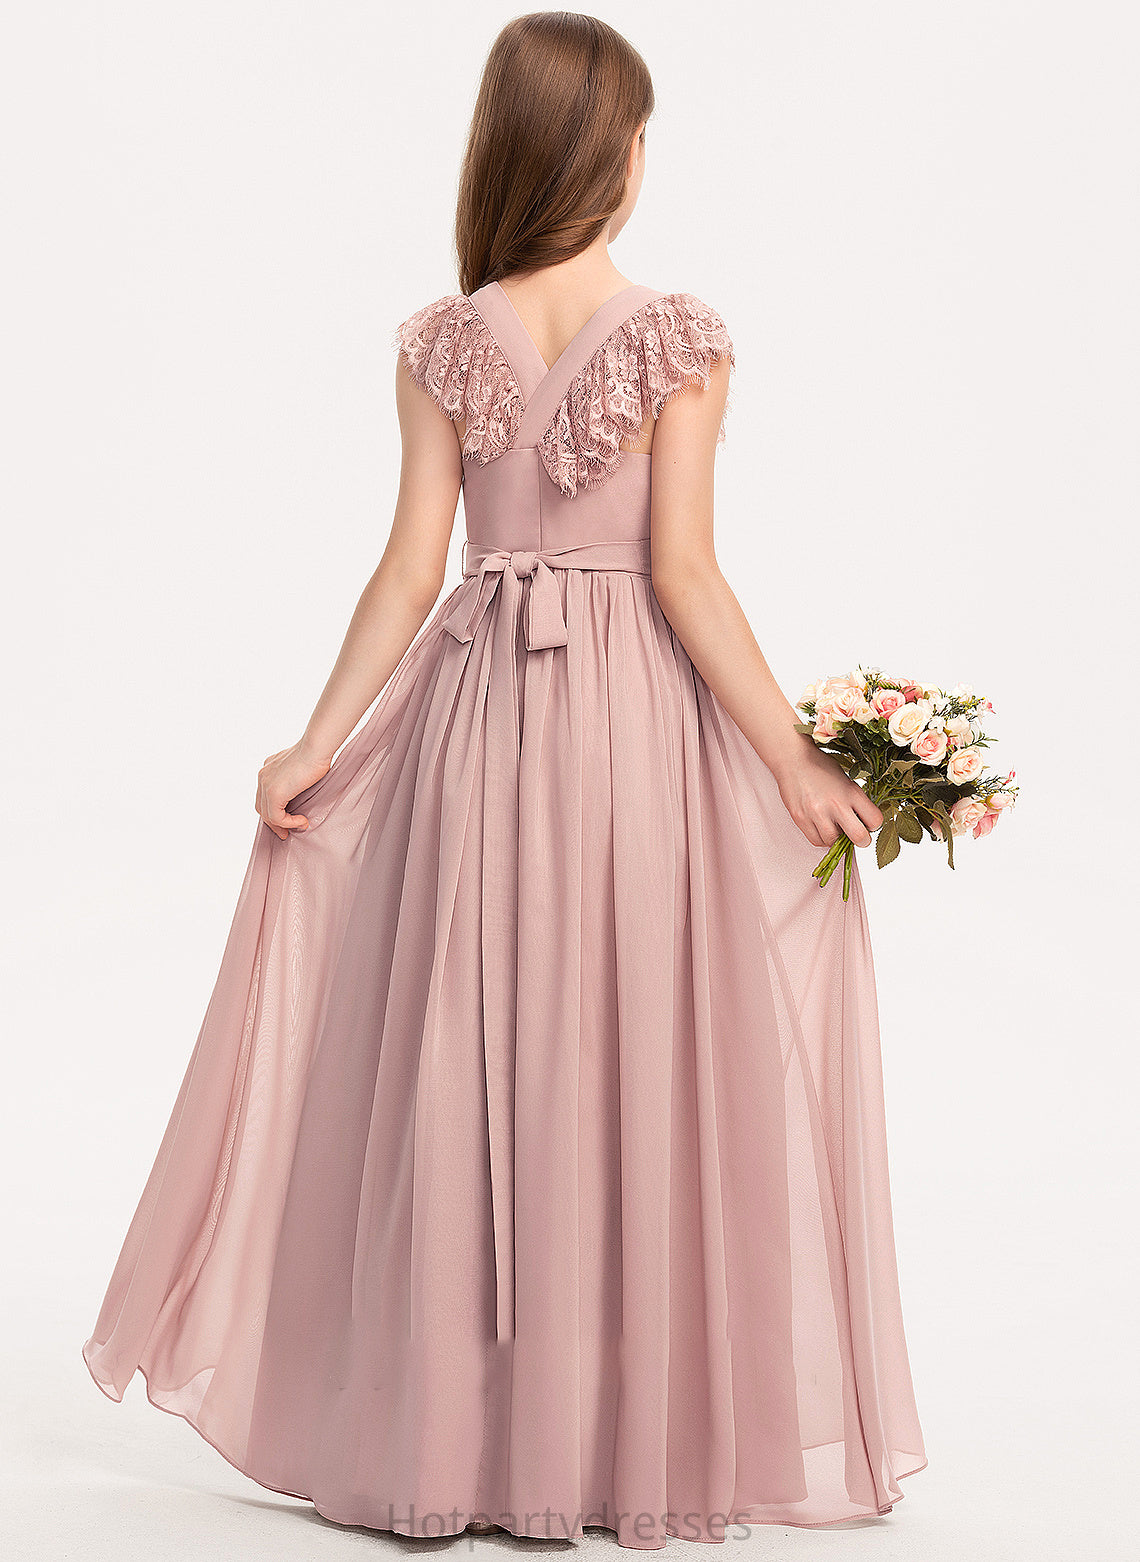 Chiffon Junior Bridesmaid Dresses Neck Kaylyn Lace With Scoop Floor-Length Bow(s) A-Line